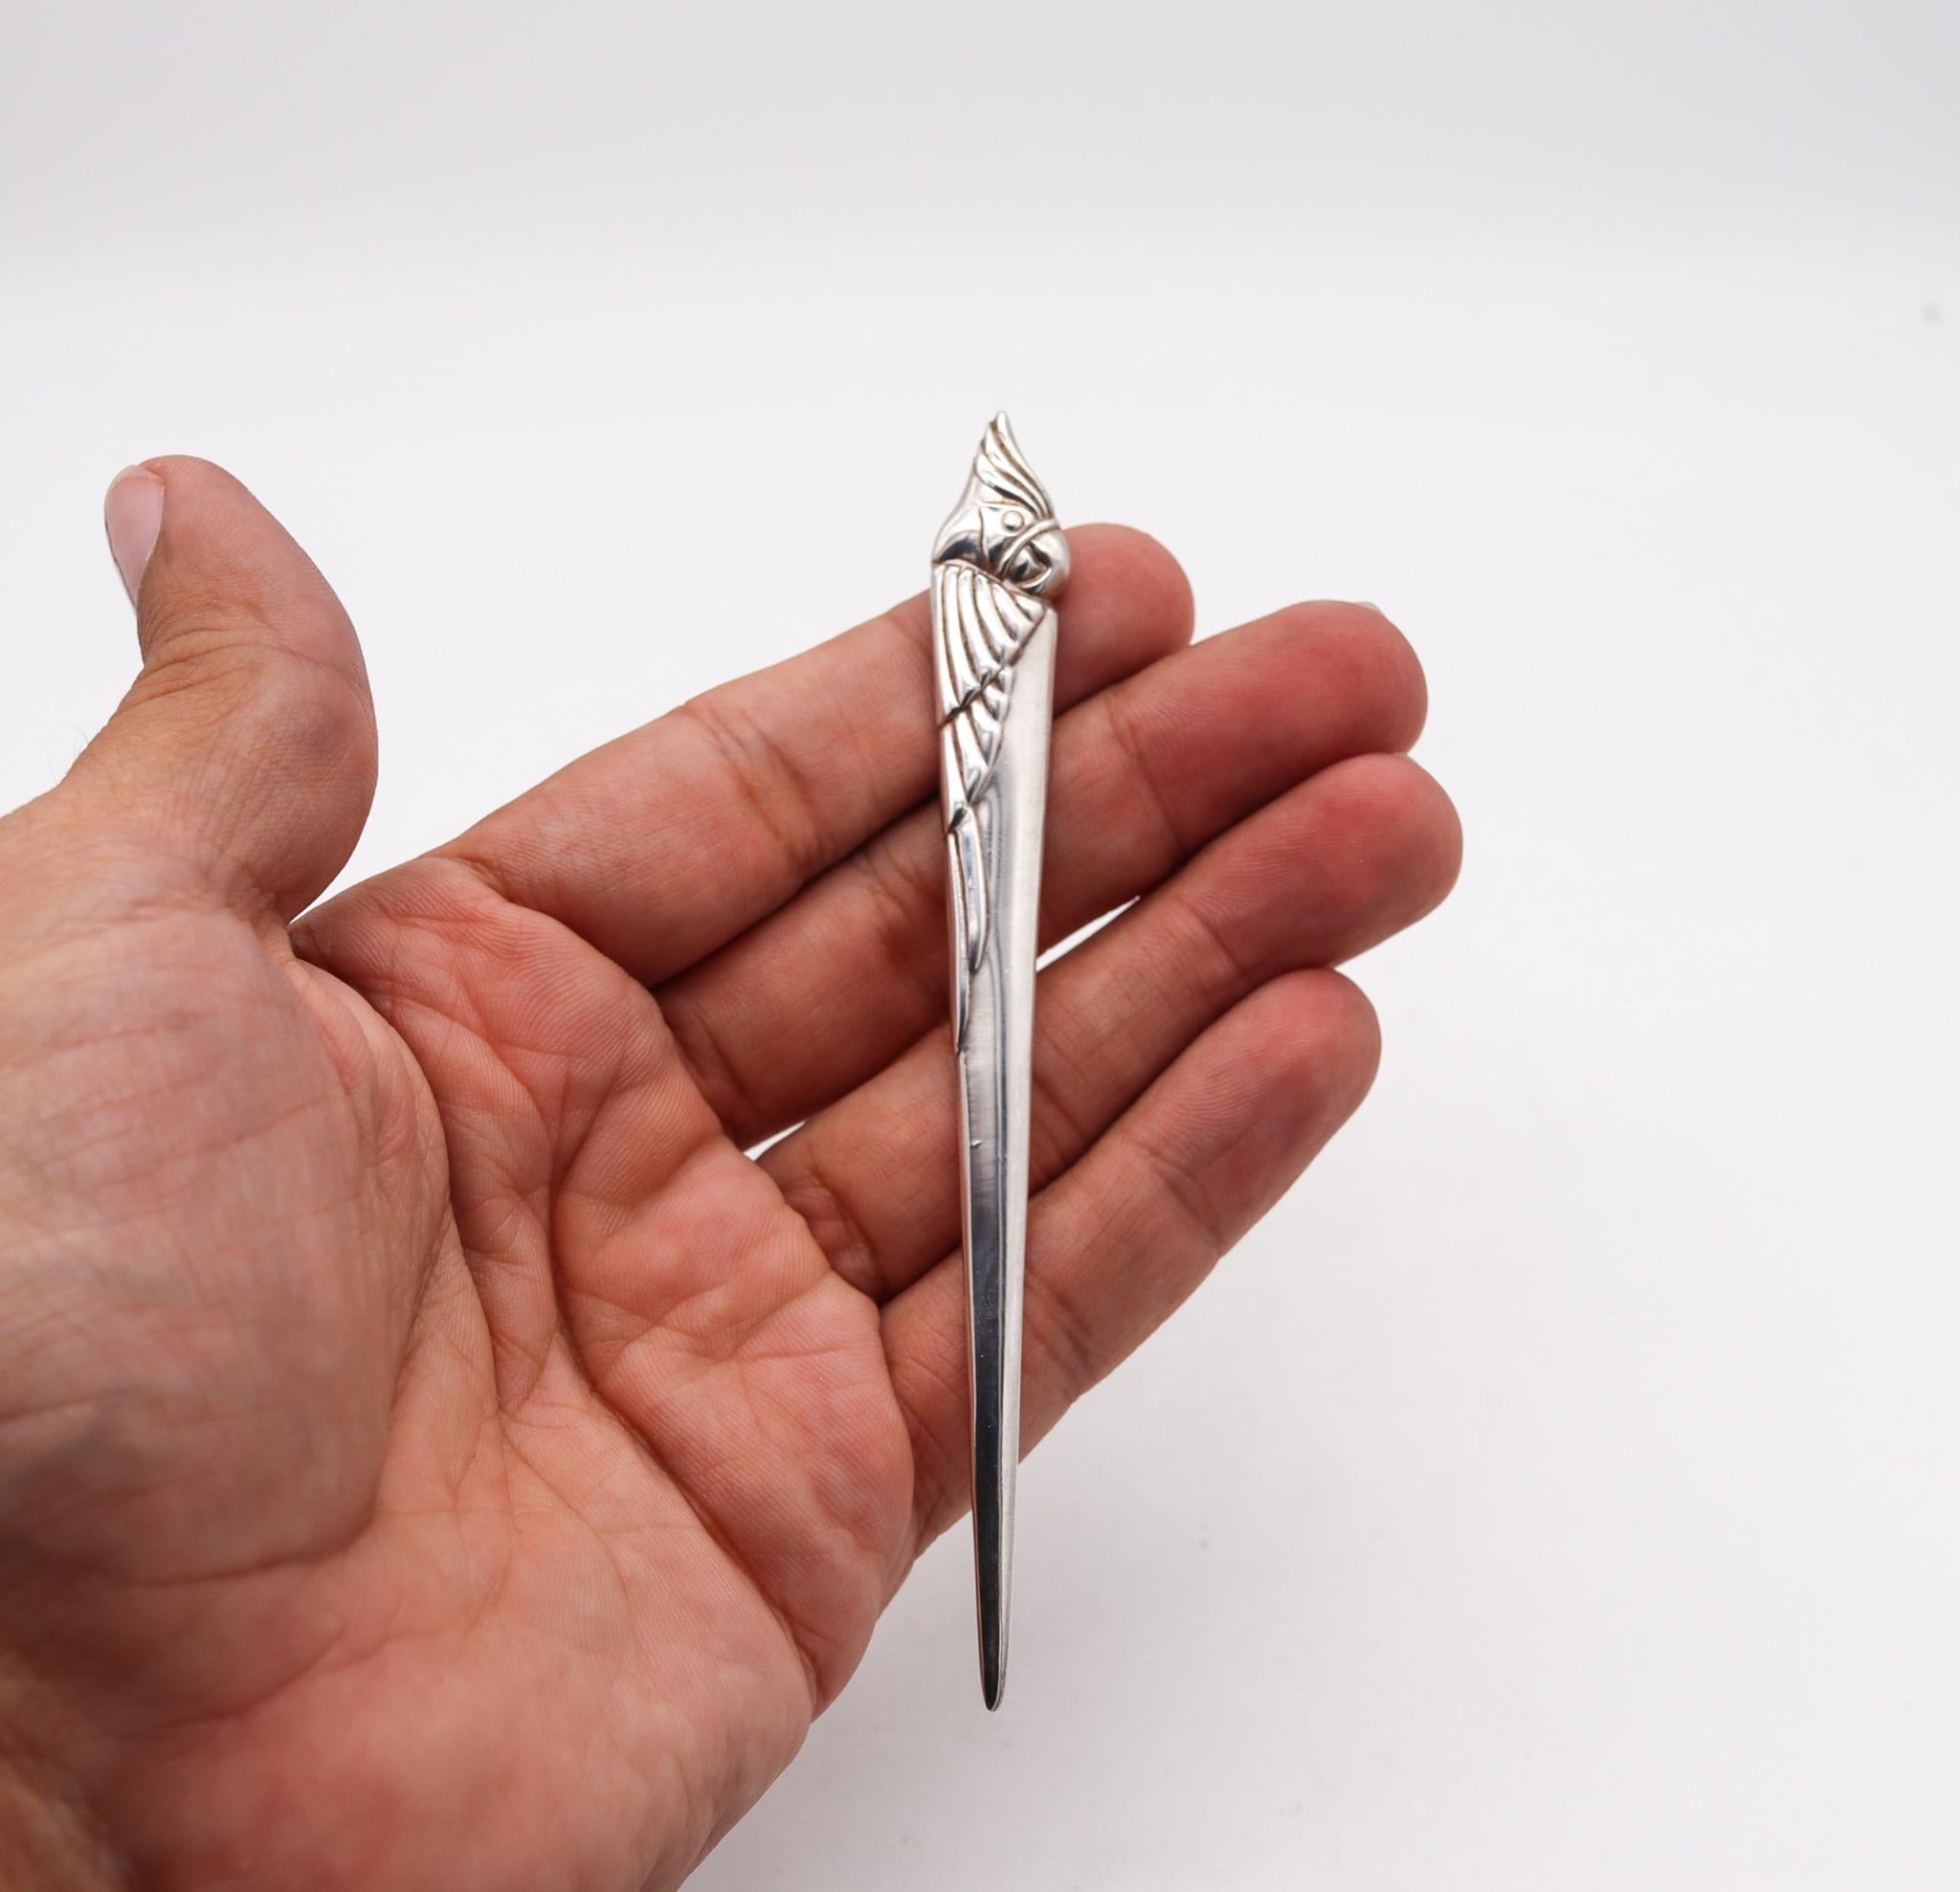 Letter opener designed by Bvlgari.

Vintage desk piece, created in Rome Italy by the luxury house of Bvlgari, back in the 1970's. This very decorative letter cutter opener have been crafted with the stylized shape of a parrot bird in solid